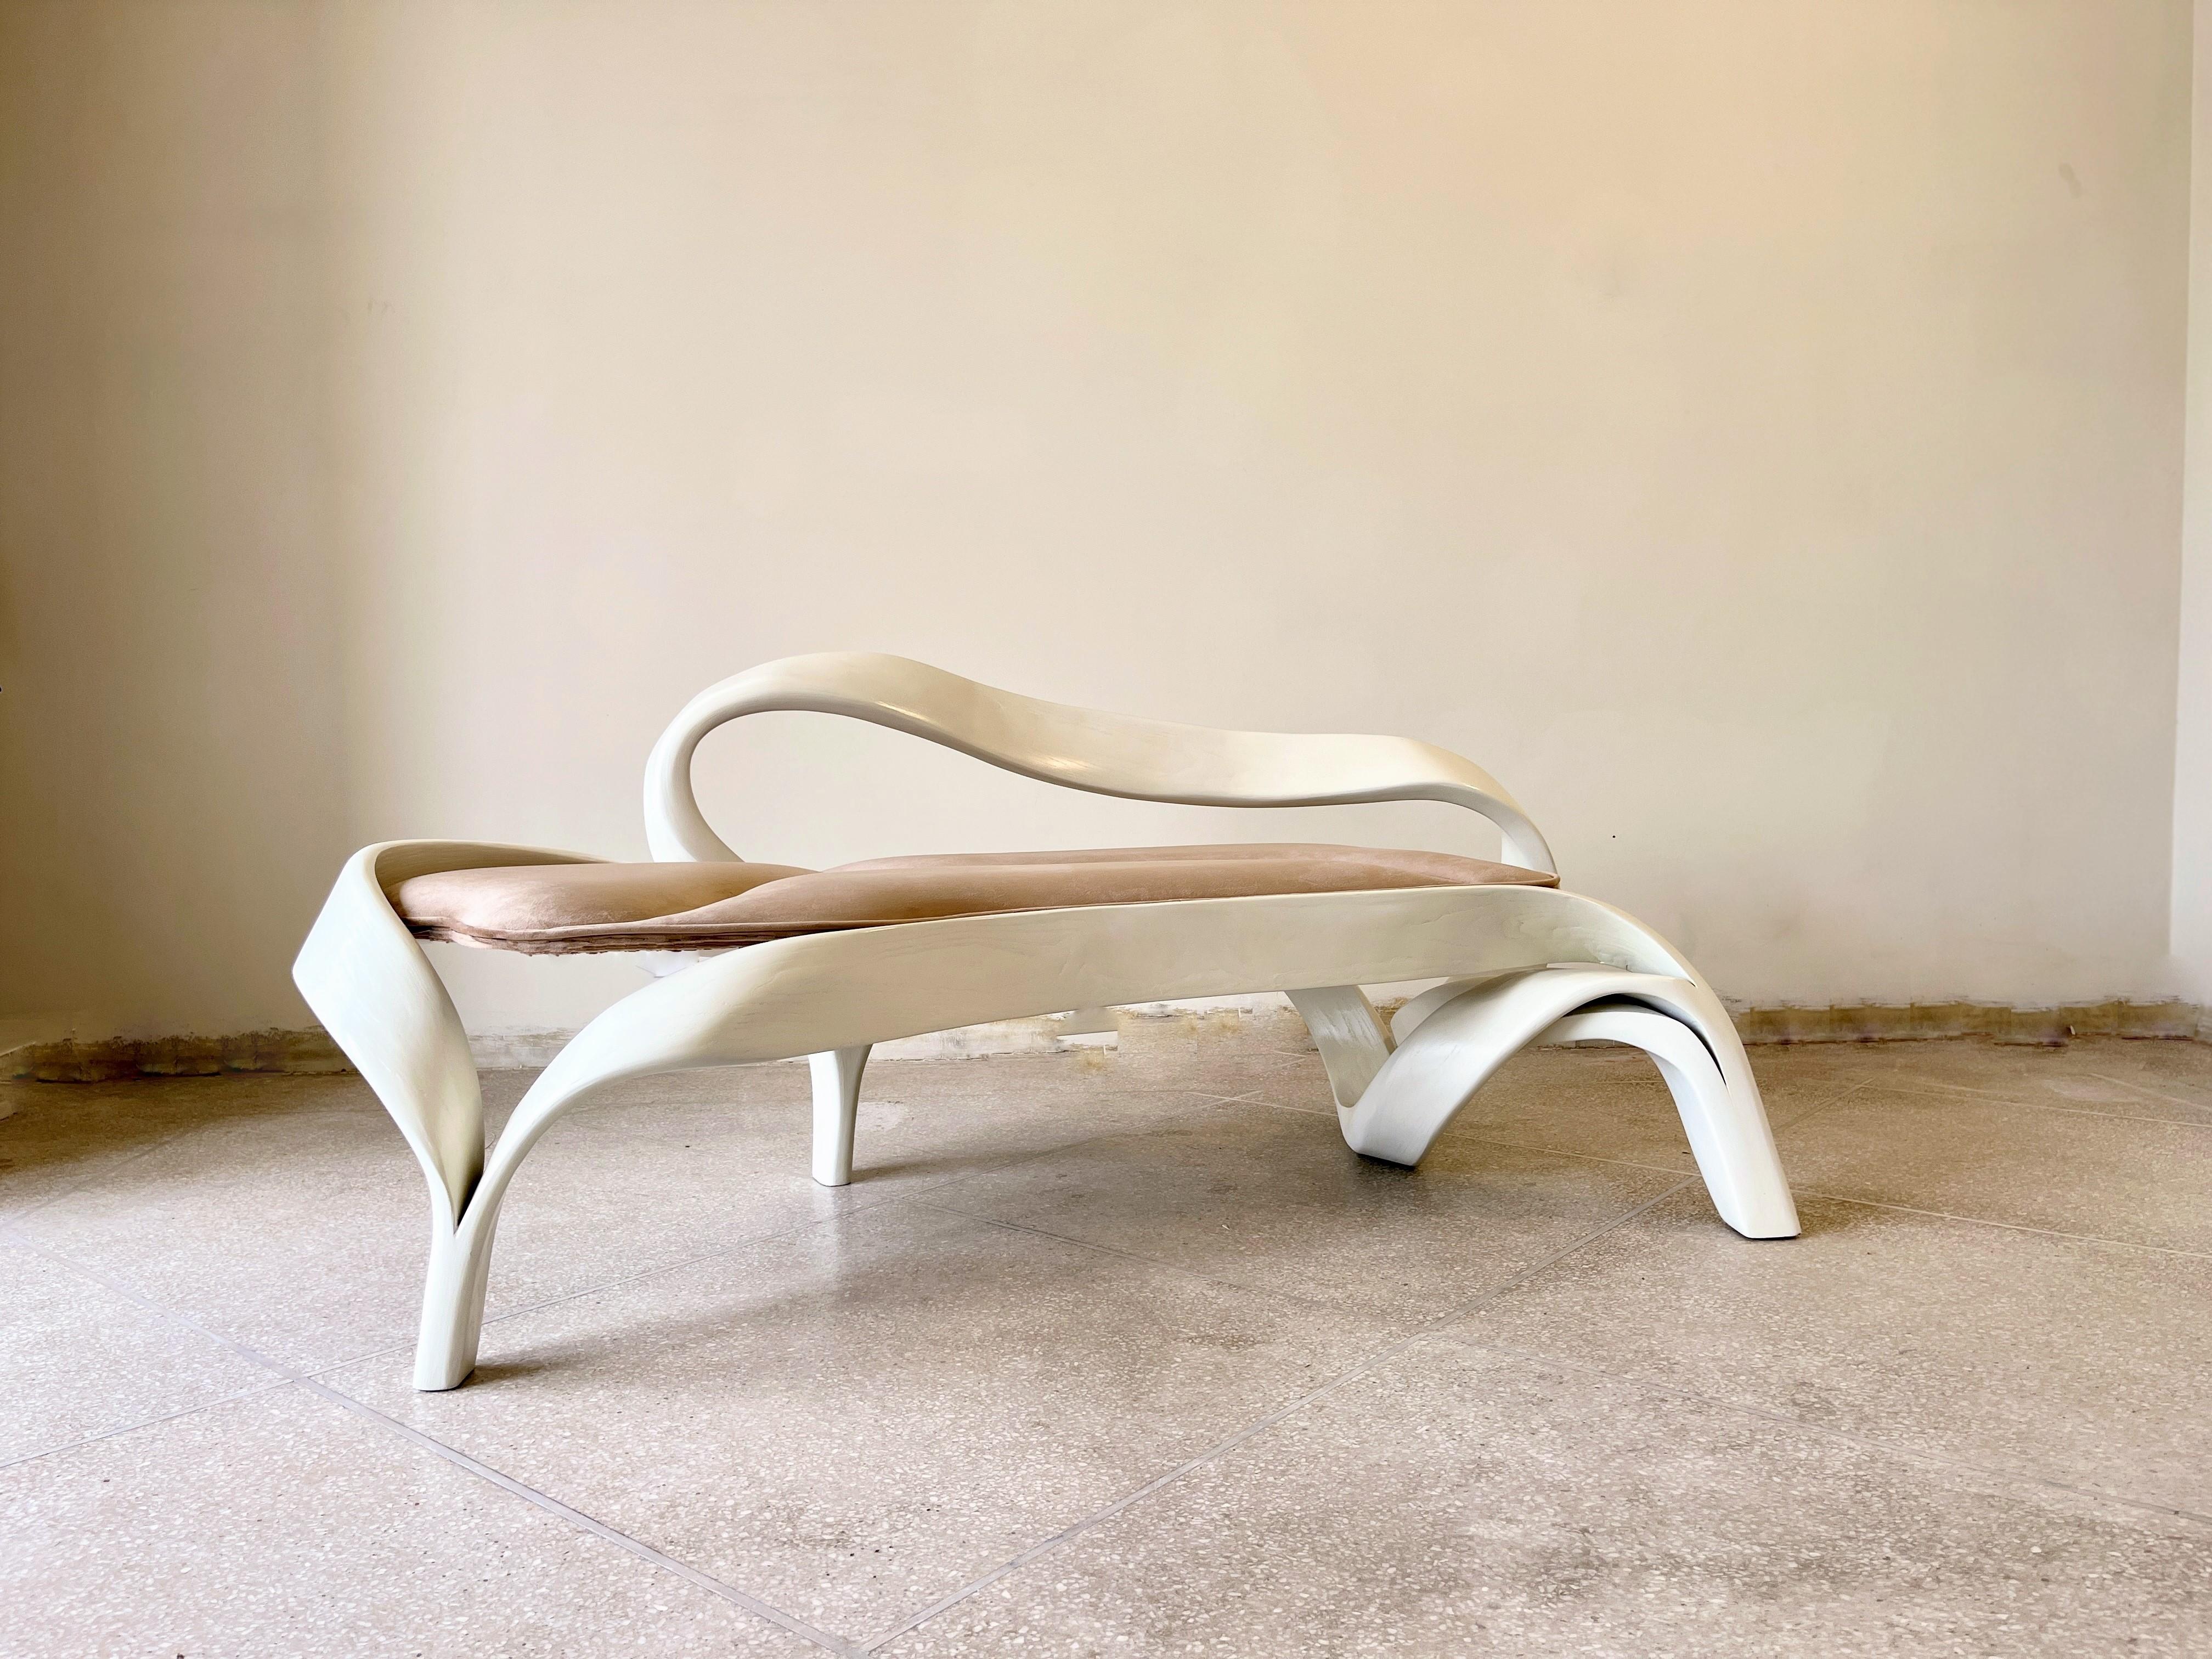 The Two Seater No. 3, a chassis designed by Raka Studio using an ancient Japanese technique of bending wood. The design is inspired by the organic flows of nature and the natural shapes that occur in a natural landscape. Each design element